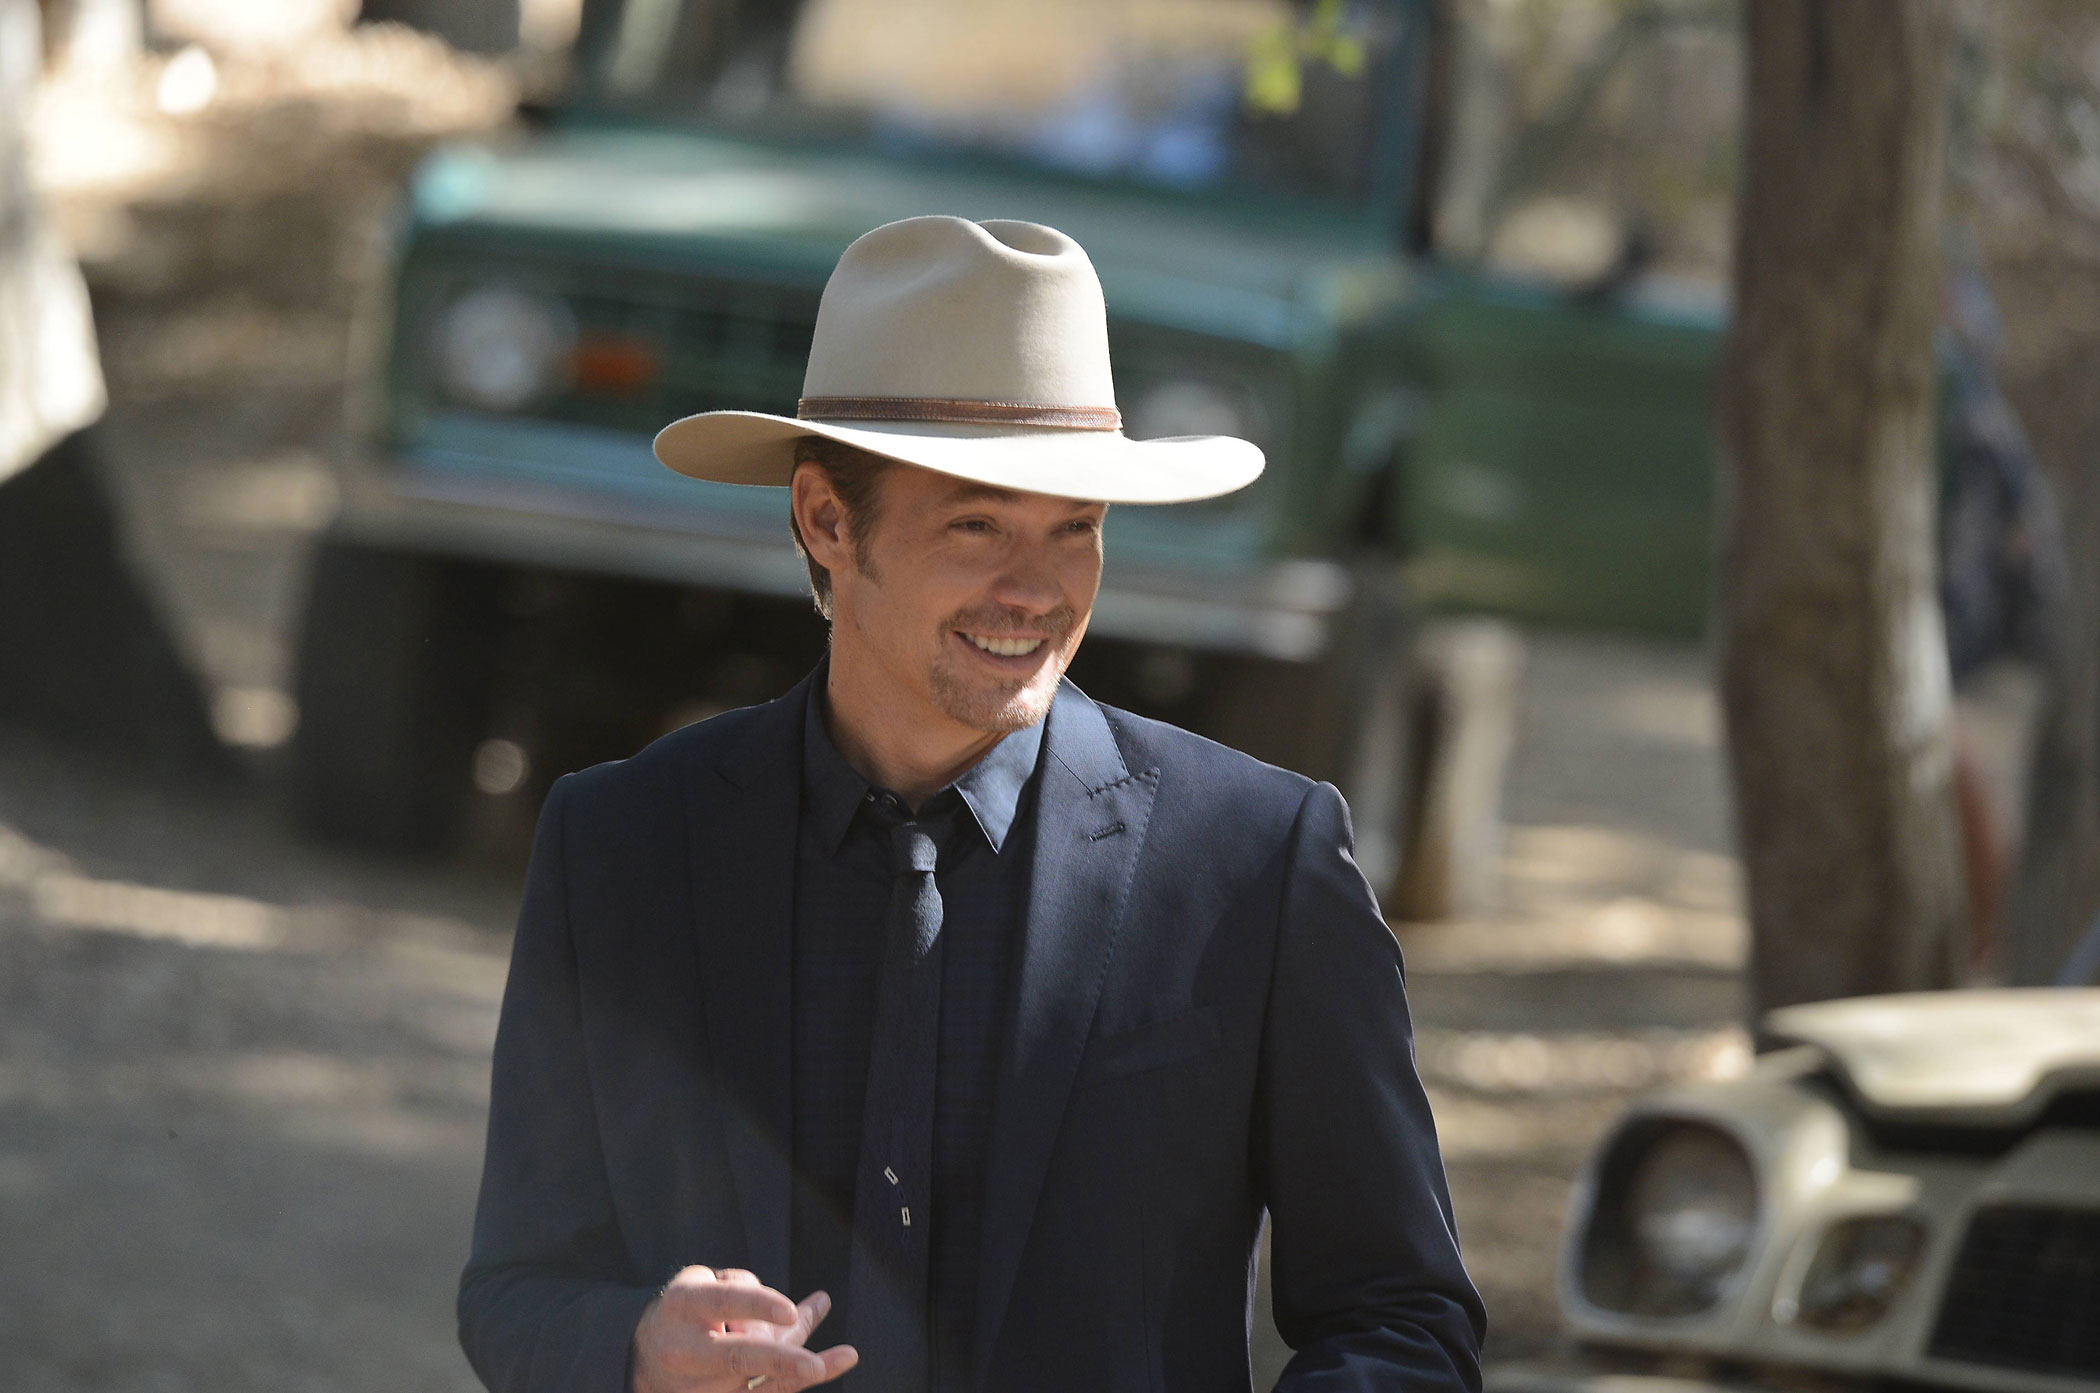 JUSTIFIED -- "Cash Game" -- Episode 602 (Airs Tuesday, January 27, 10:00 pm e/p) -- Pictured: Timothy Olyphant as Deputy U.S. Marshal Raylan Givens -- CR: Michael Becker/FX